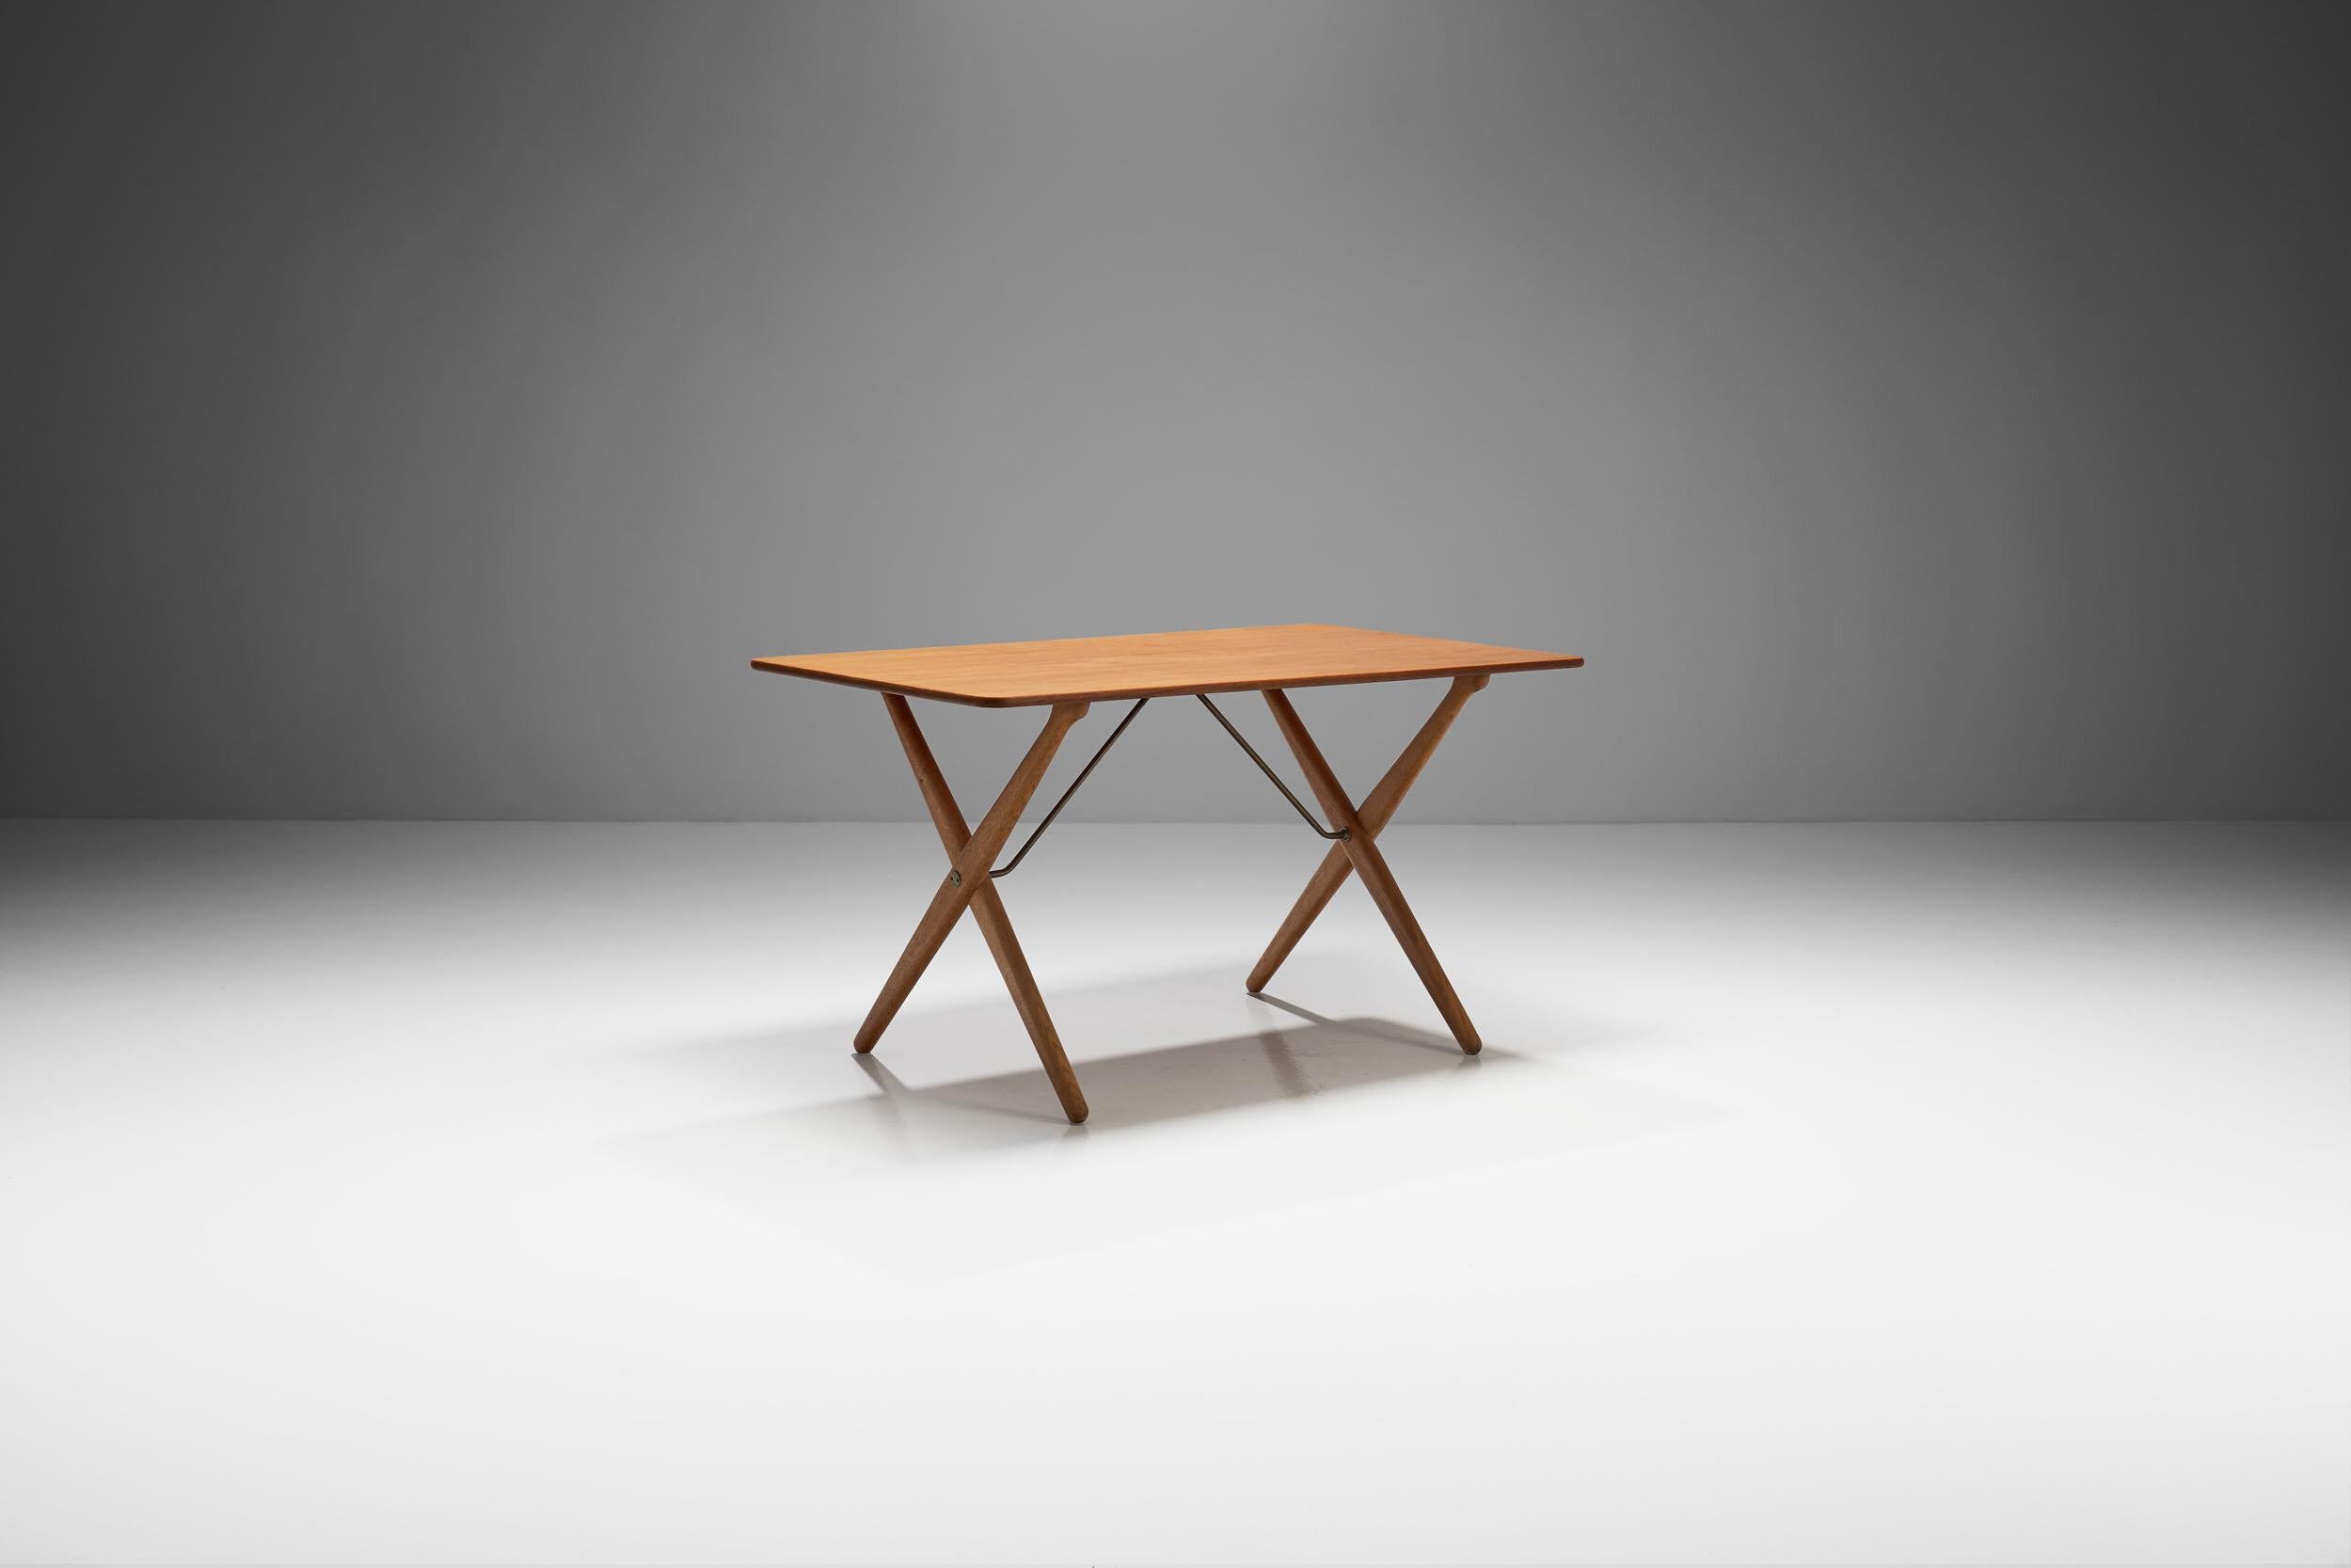 Hans Wegner 'AT 308' oak coffee table with cross-leg frame, Denmark 1950s. Manufactured and marked by Andreas Tuck, Odense. This coffee table has a grain that has come out beautifully over time, the slender cross legs are strengthened by thin metal